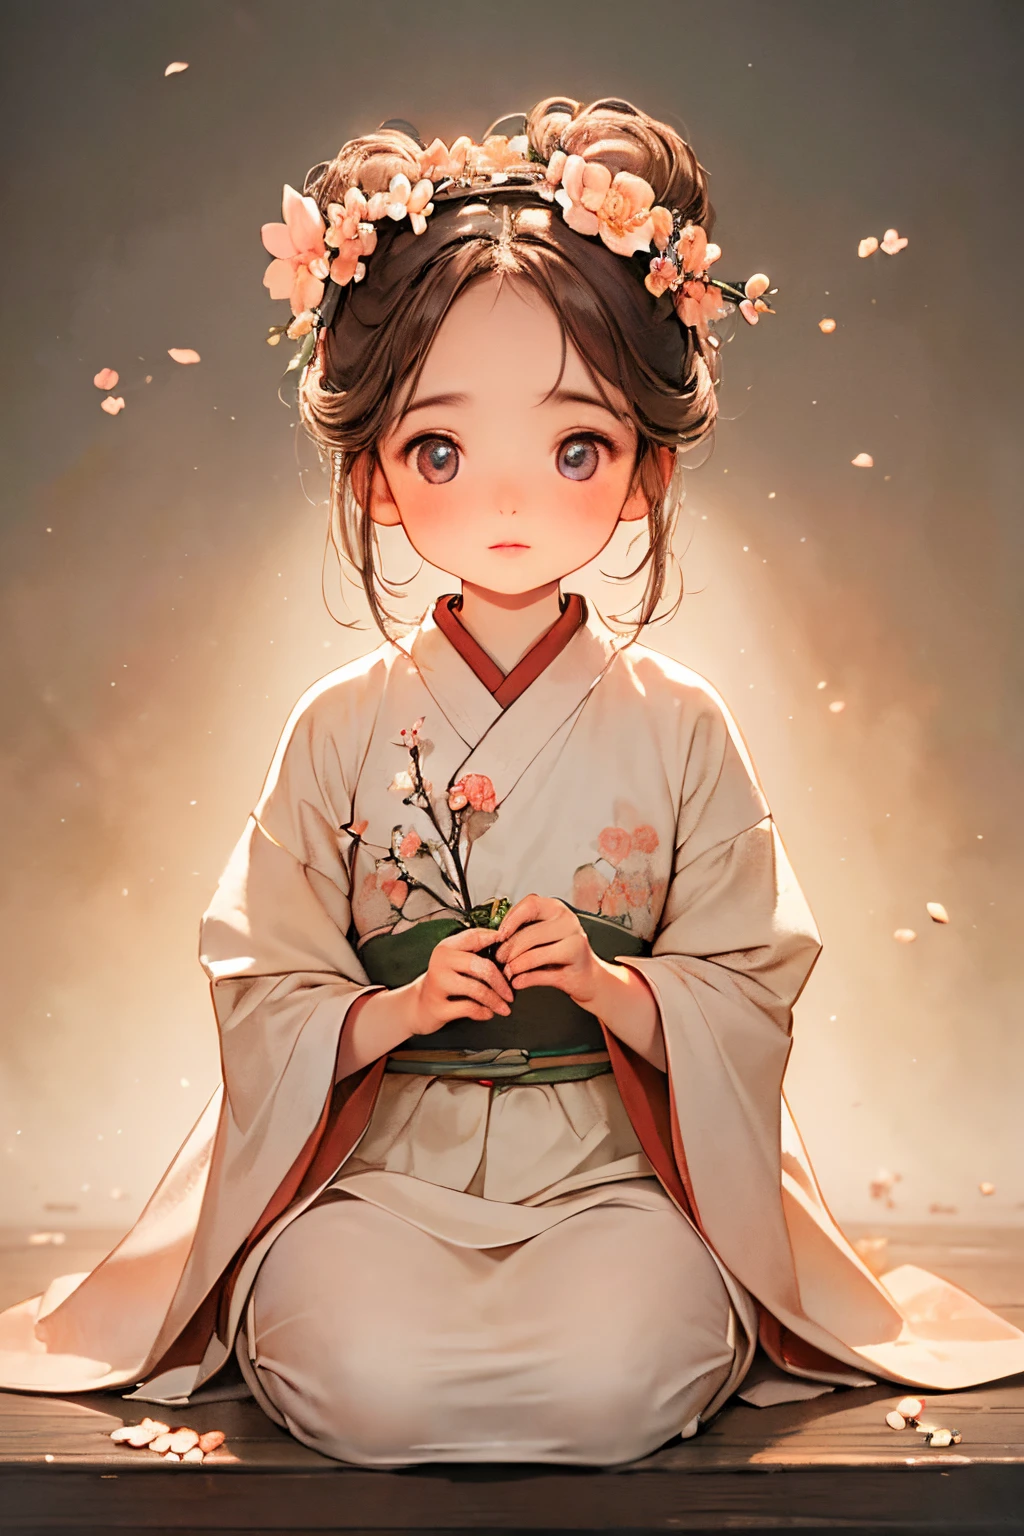 (best quality,realistic,photo-realistic:1.37), vibrant lighting, beautiful apricot blossoms, highly detailed lips and eyes, a solitary figure surrounded by a faint floral fragrance, botanical feminine qualities，Rosa flowers